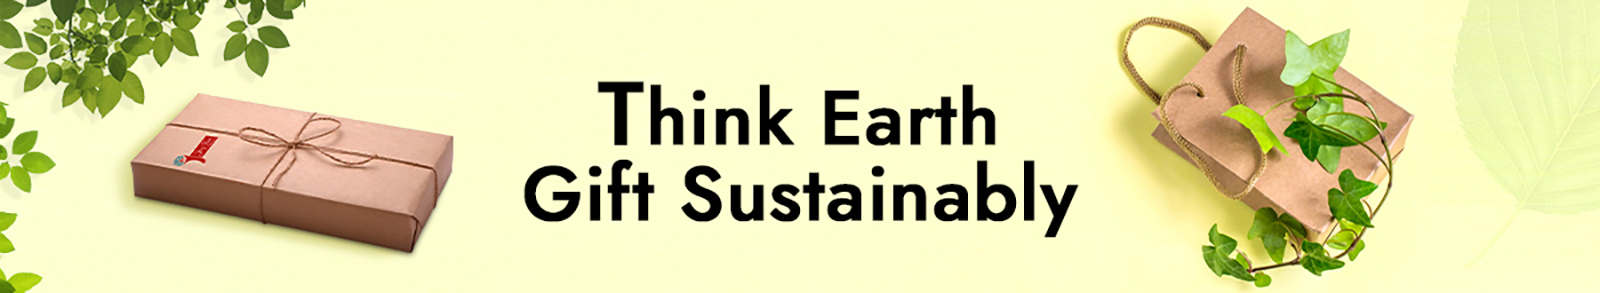 Think-Earth,-Gift-Sustainably.jpg-01